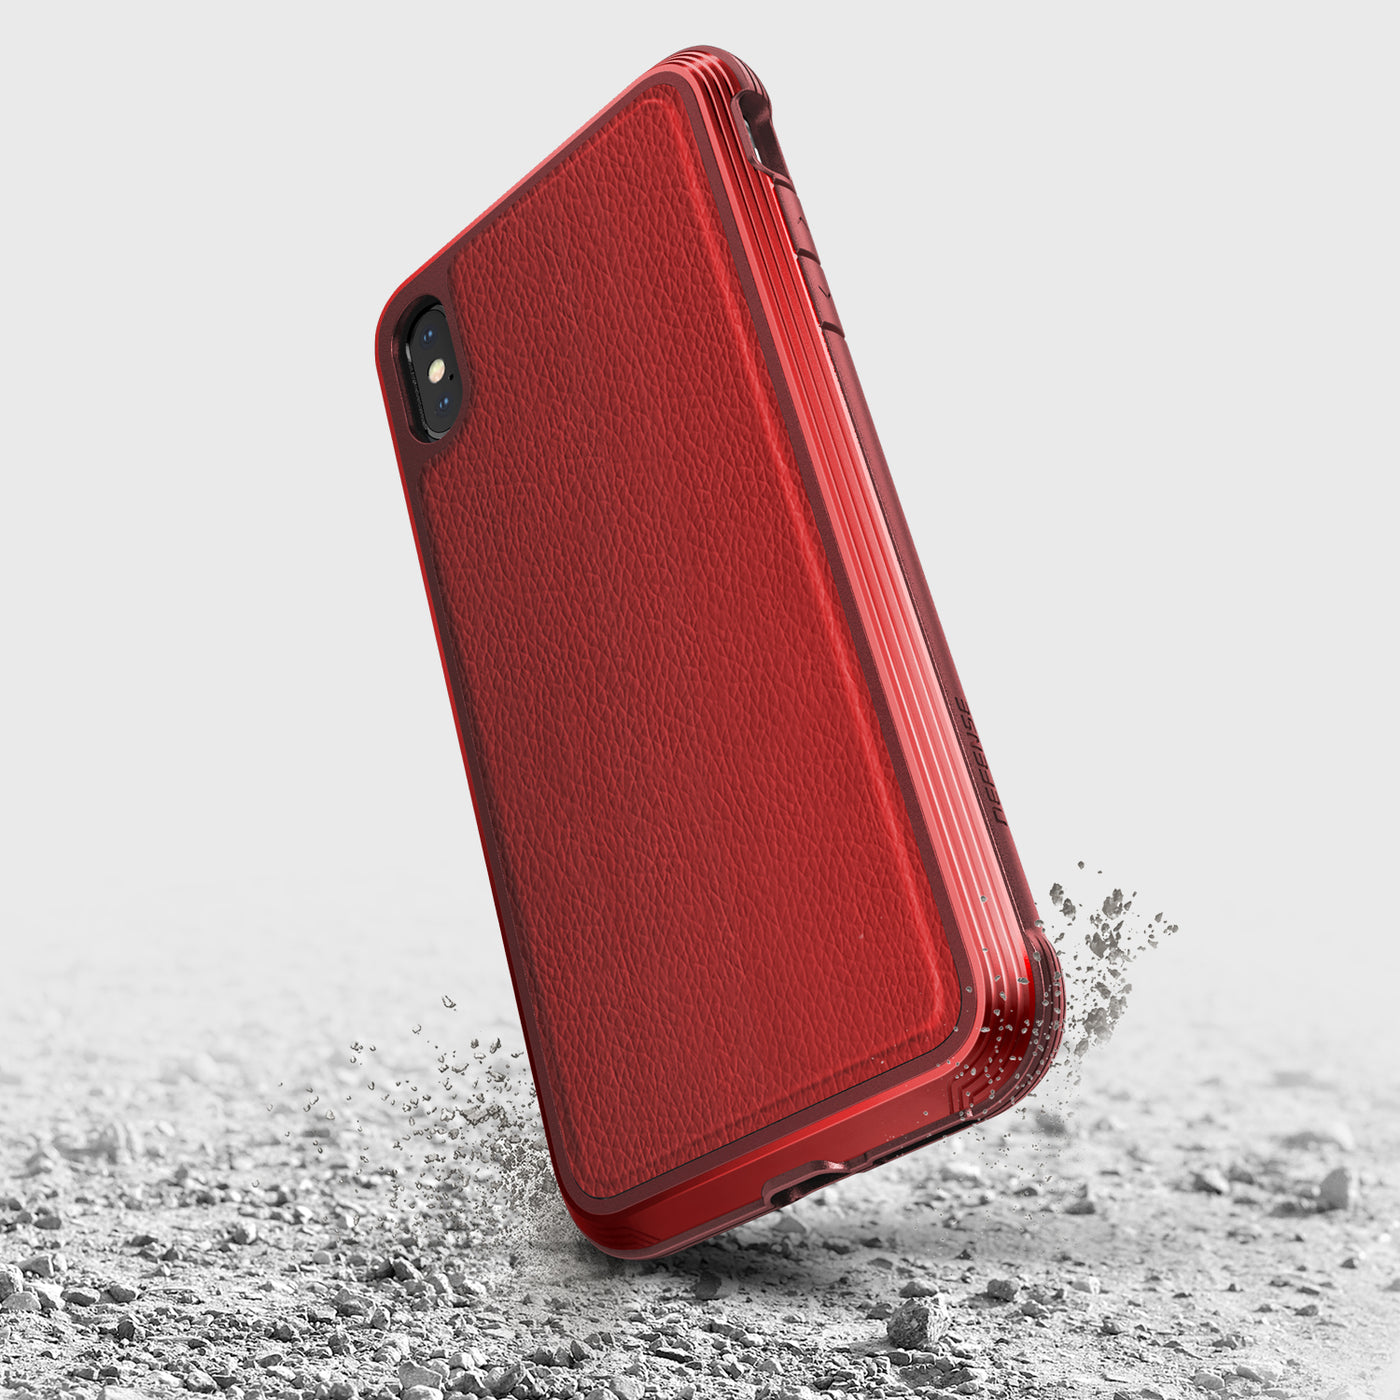 Luxurious Case for iPhone XS Max. Raptic Lux in red.